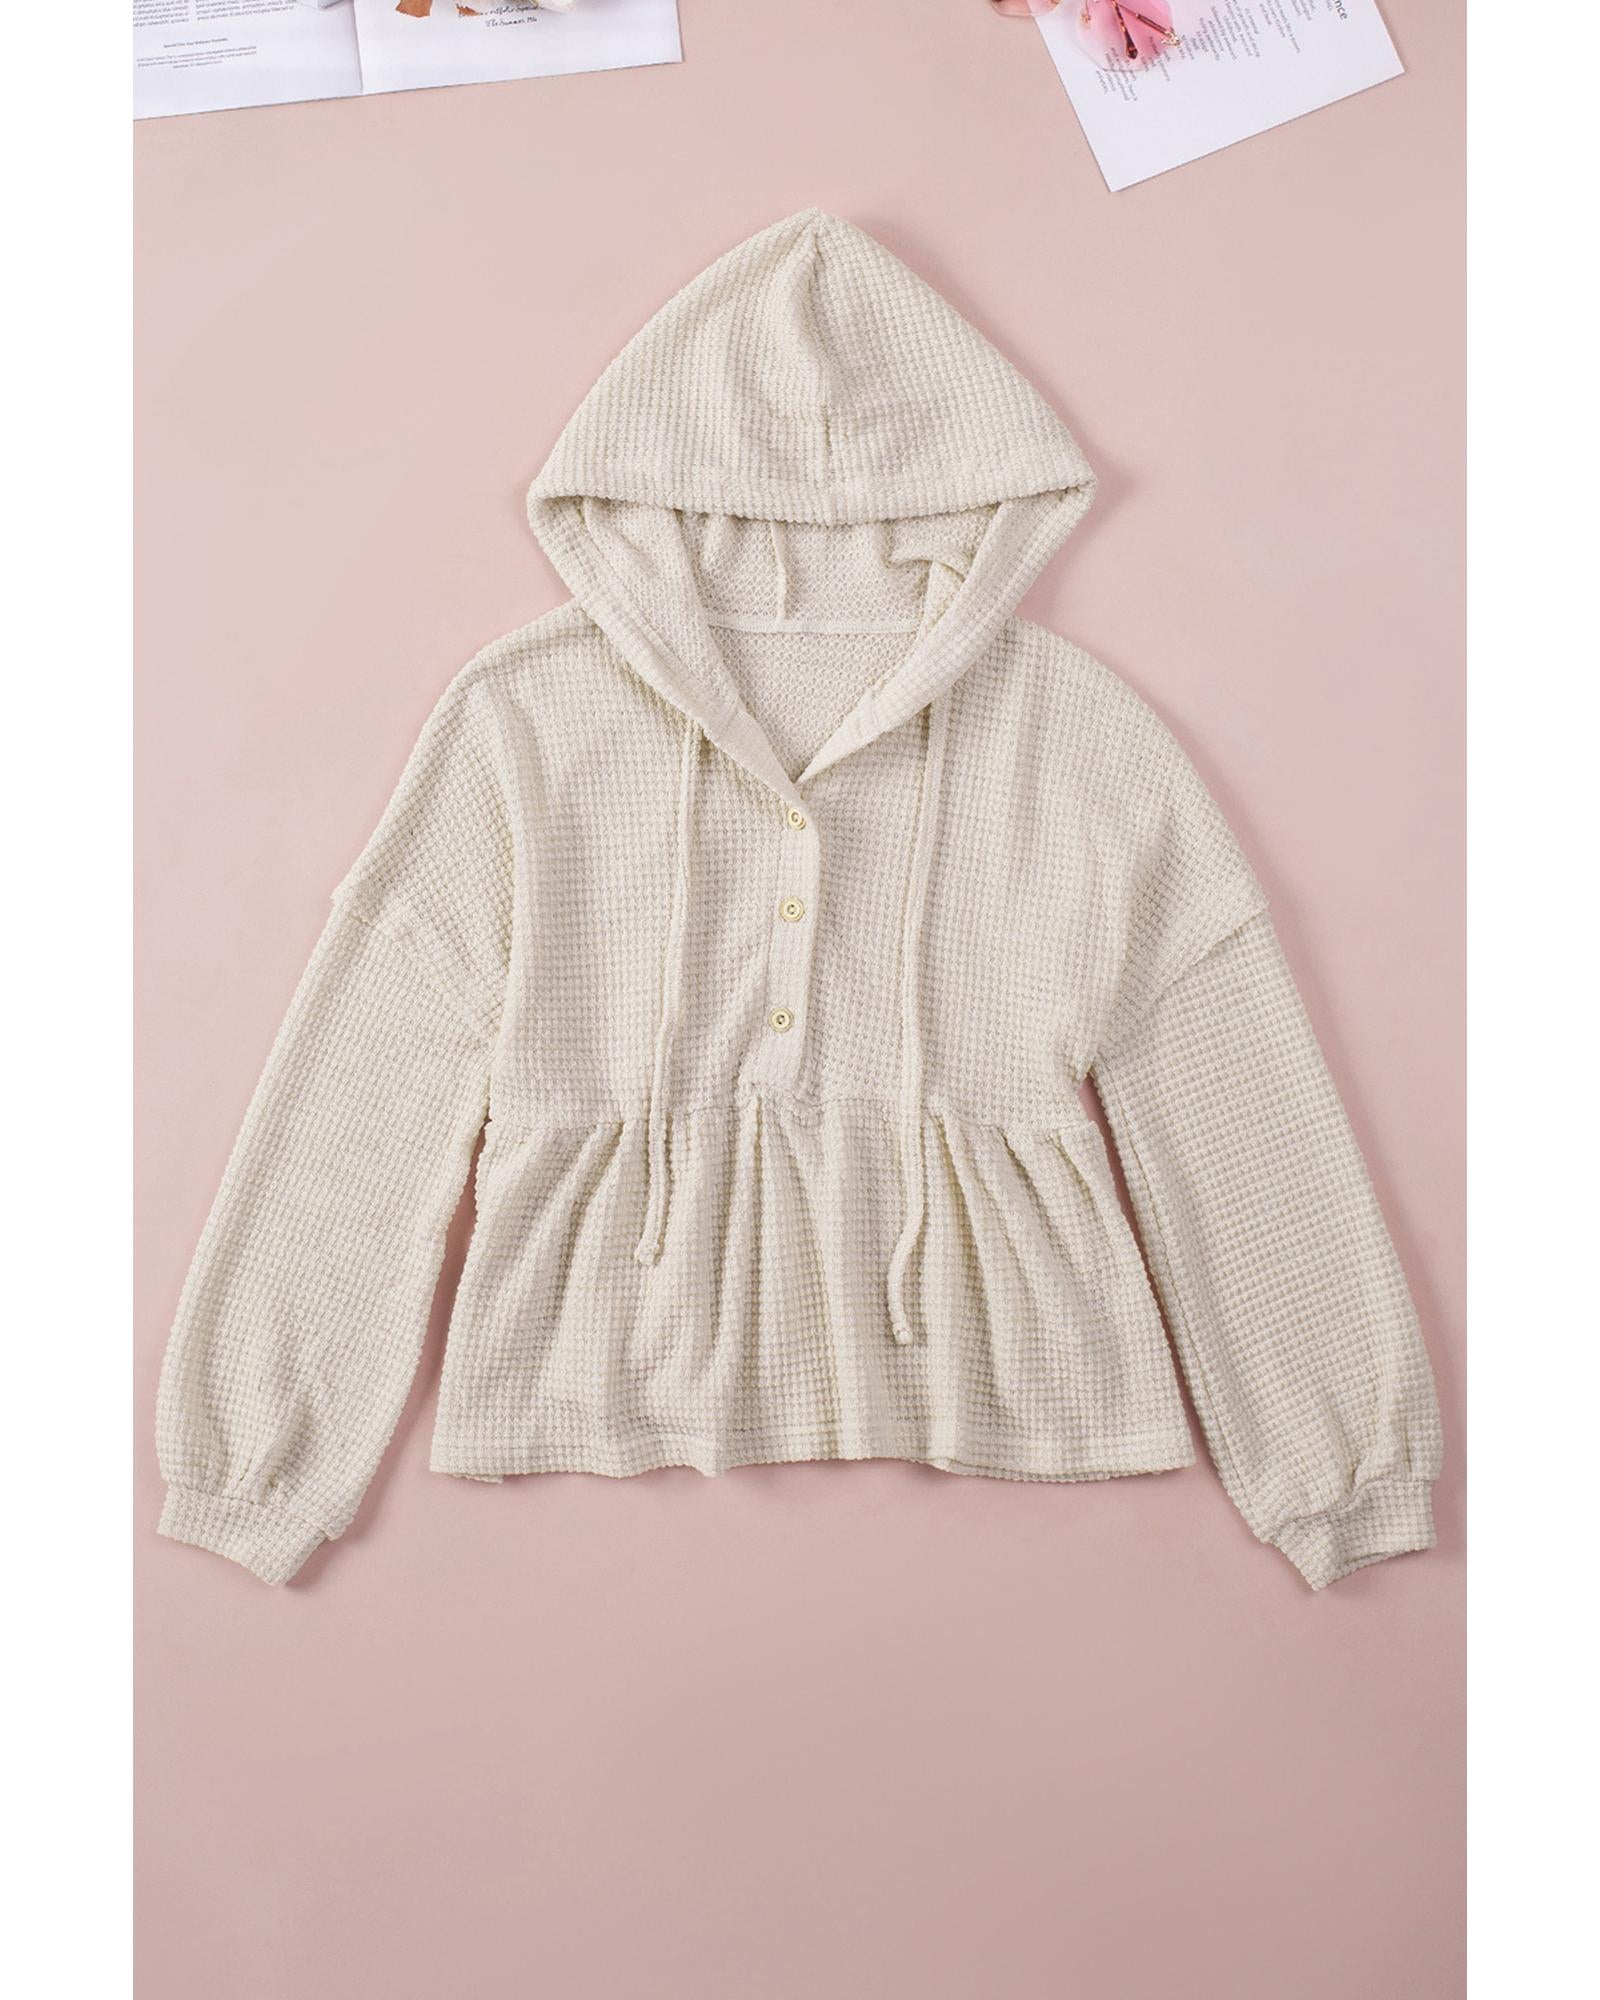 Azura Exchange Waffle Knit Buttons Ruffled Hooded Top - L